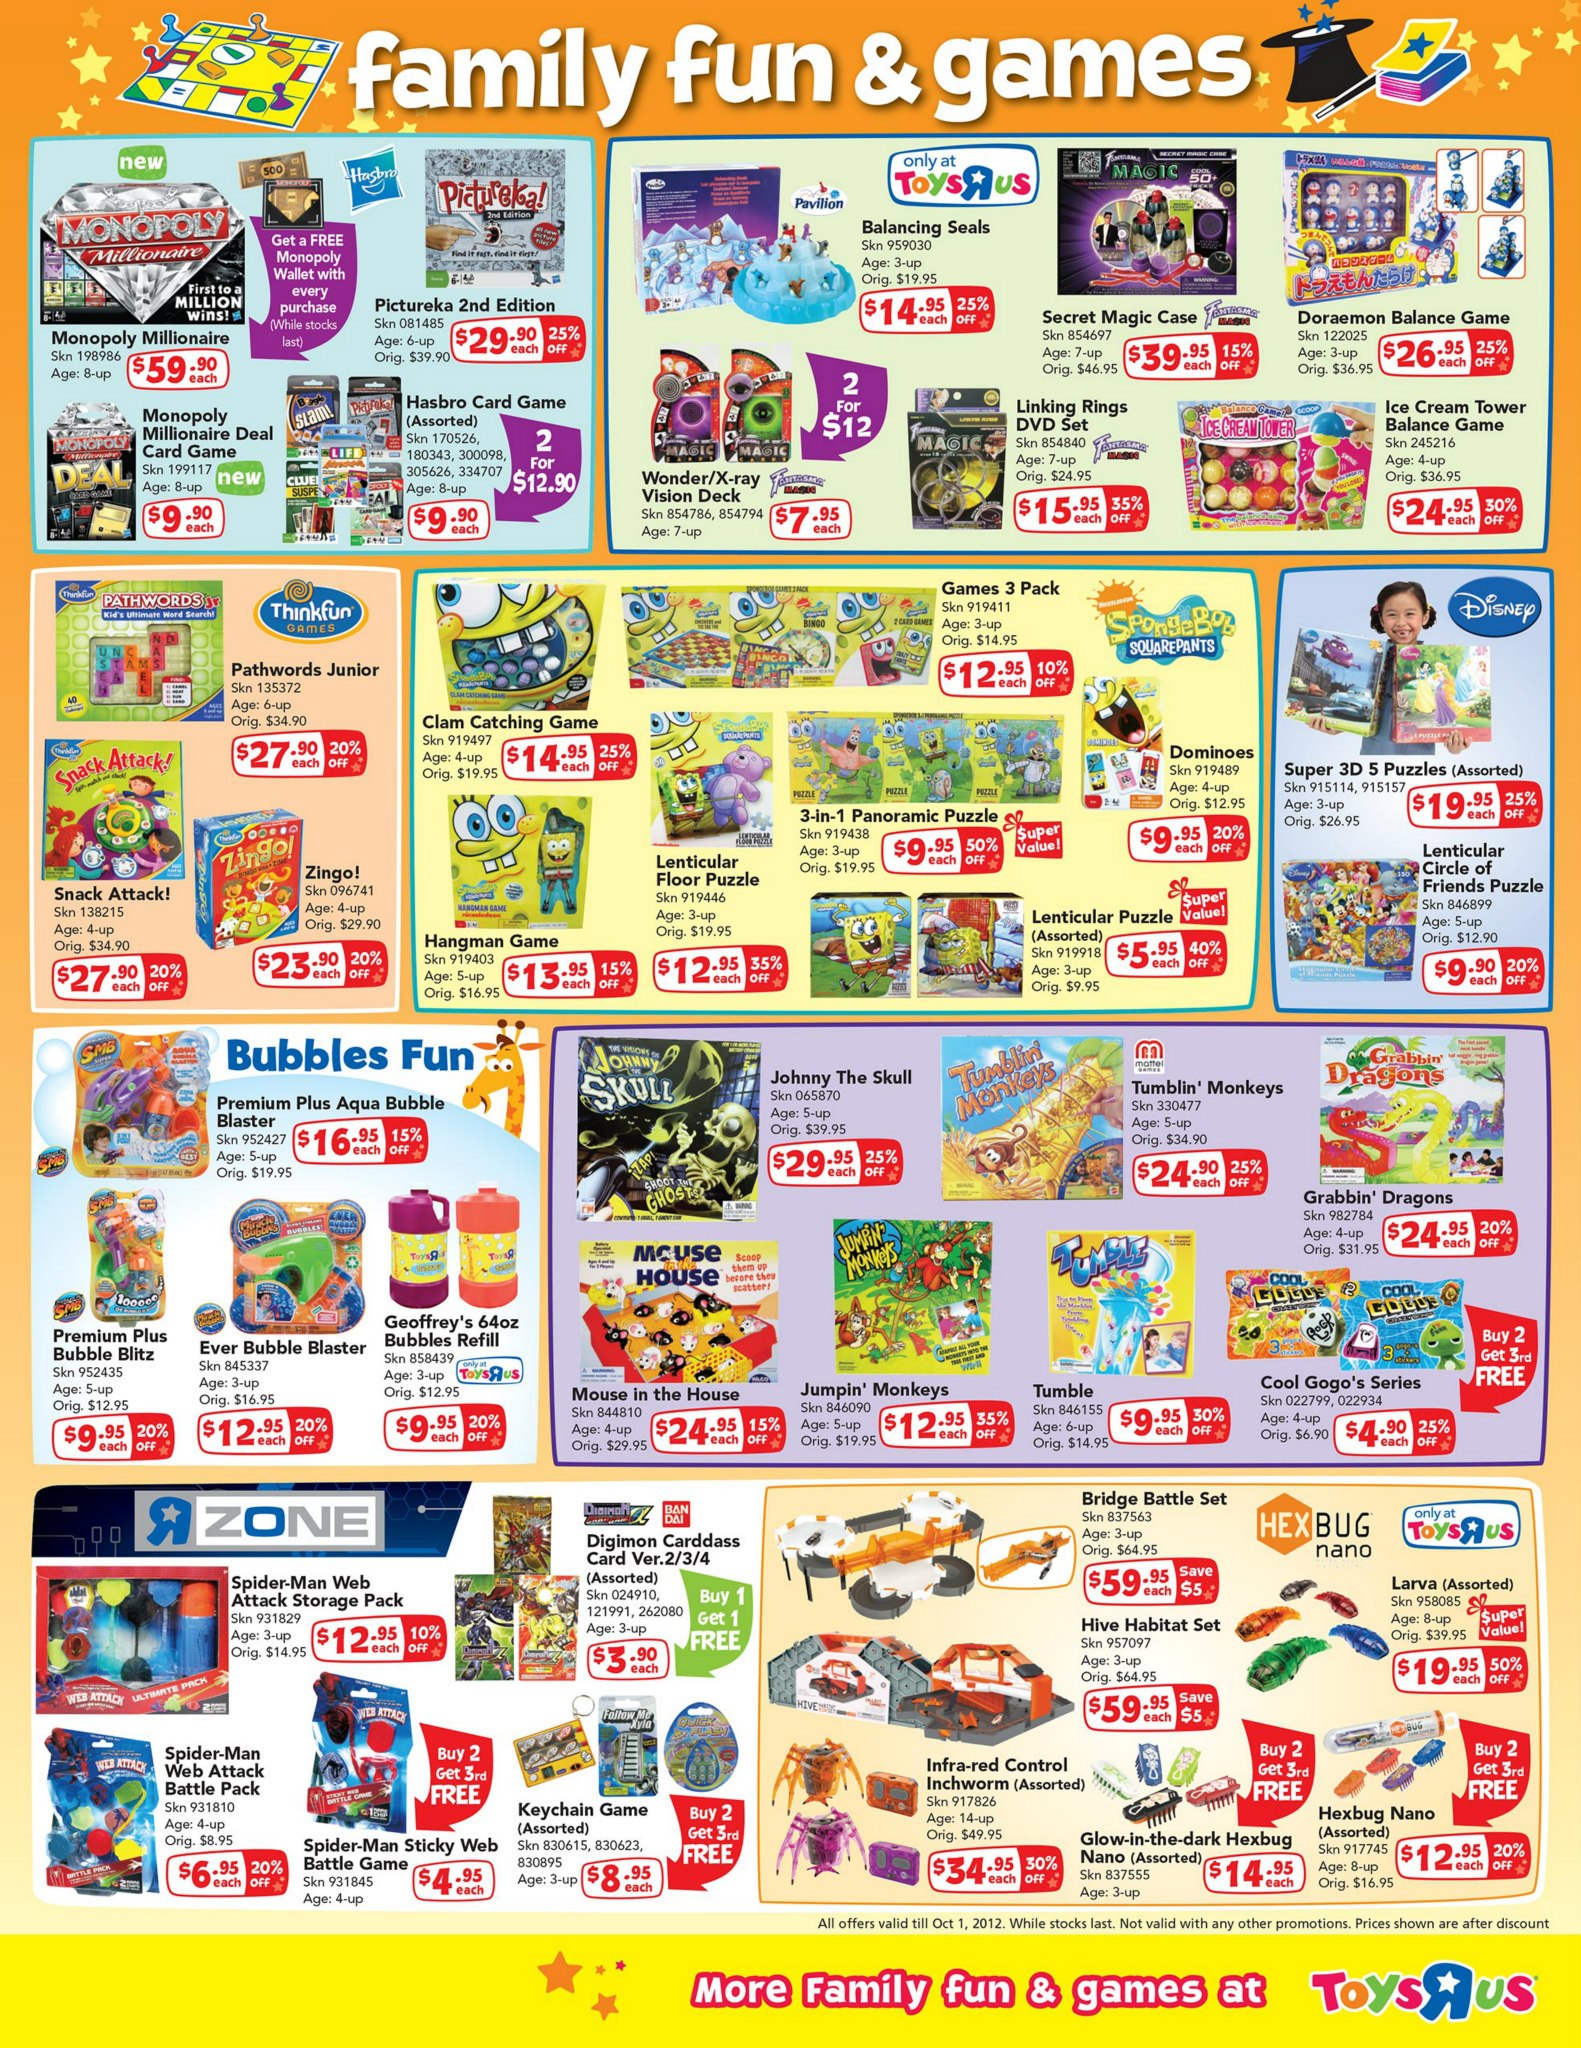 Featured image for Toys "R" Us School Break Promotion Offers 30 Aug - 1 Oct 2012